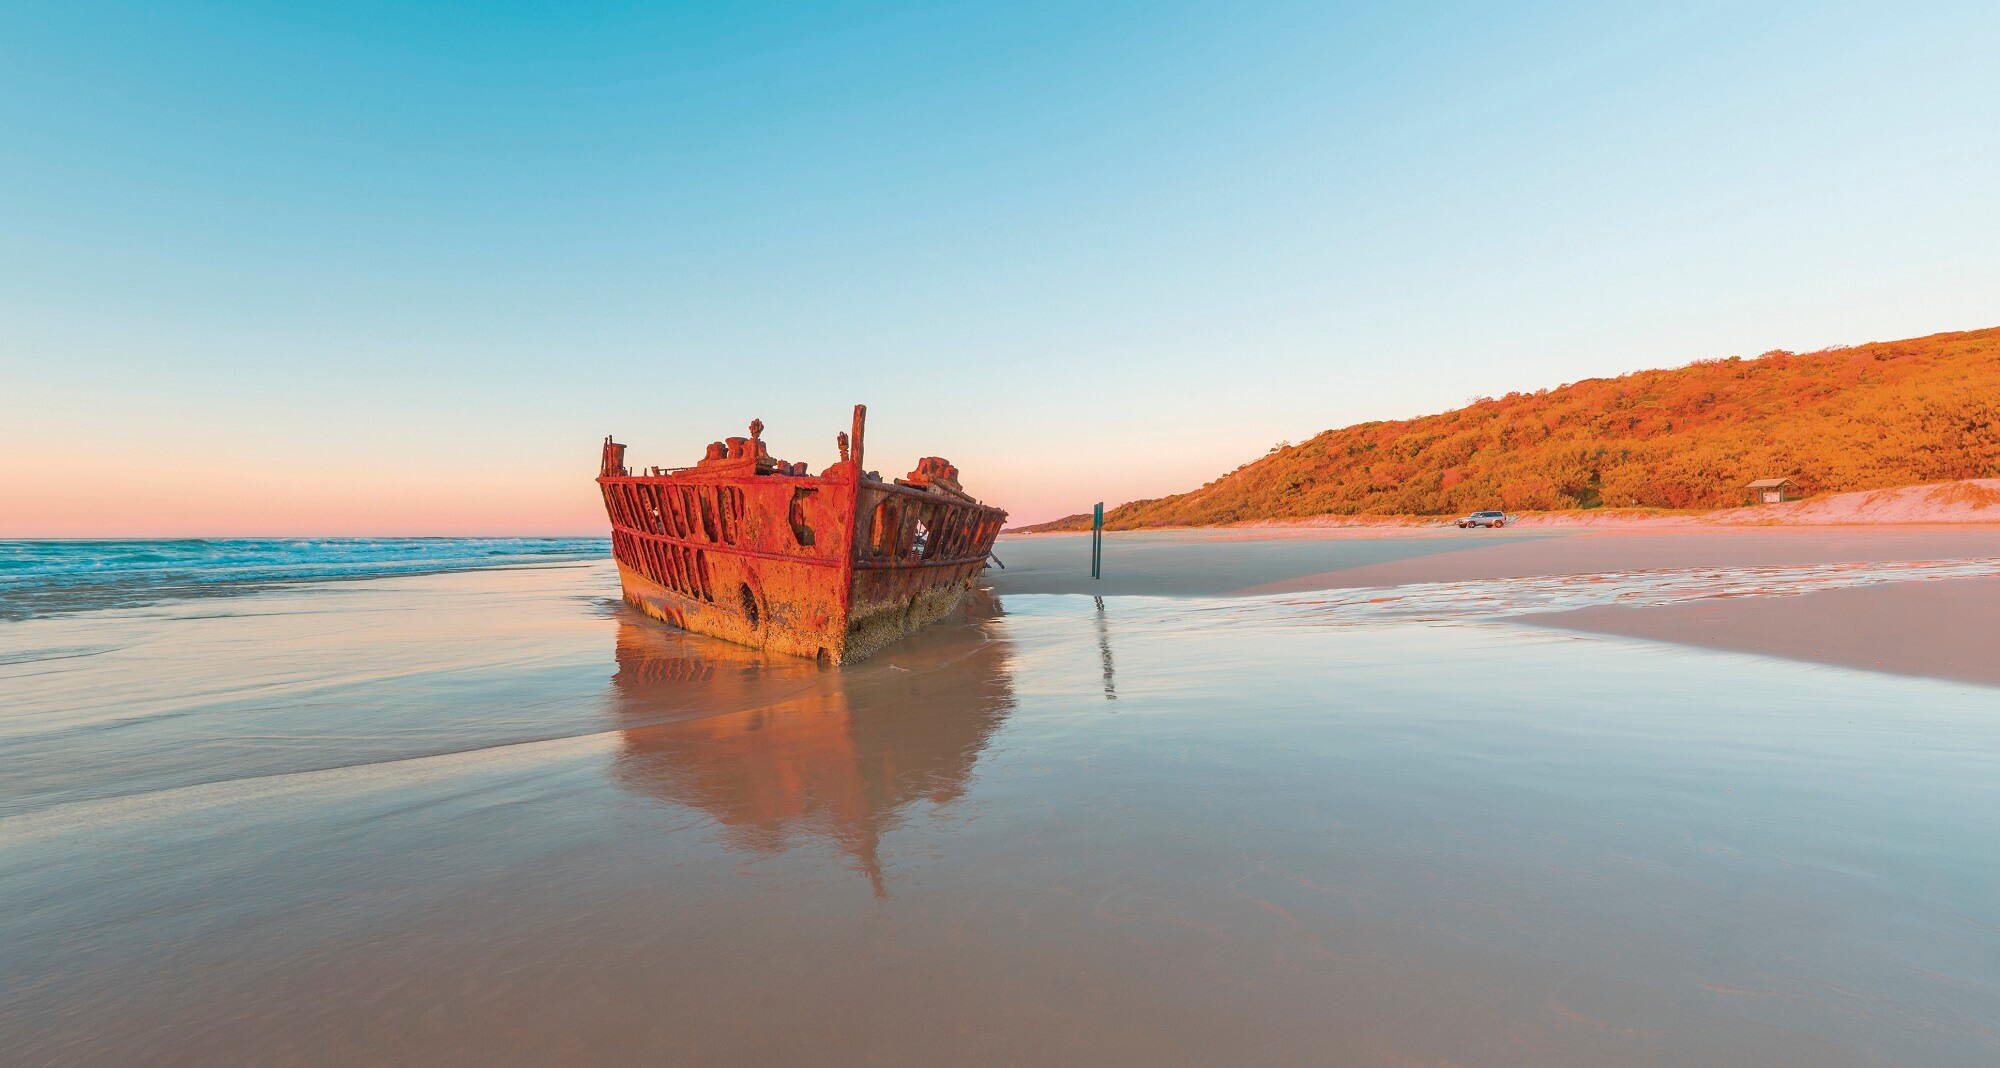 The Fascinating Stories of the Maheno Shipwreck